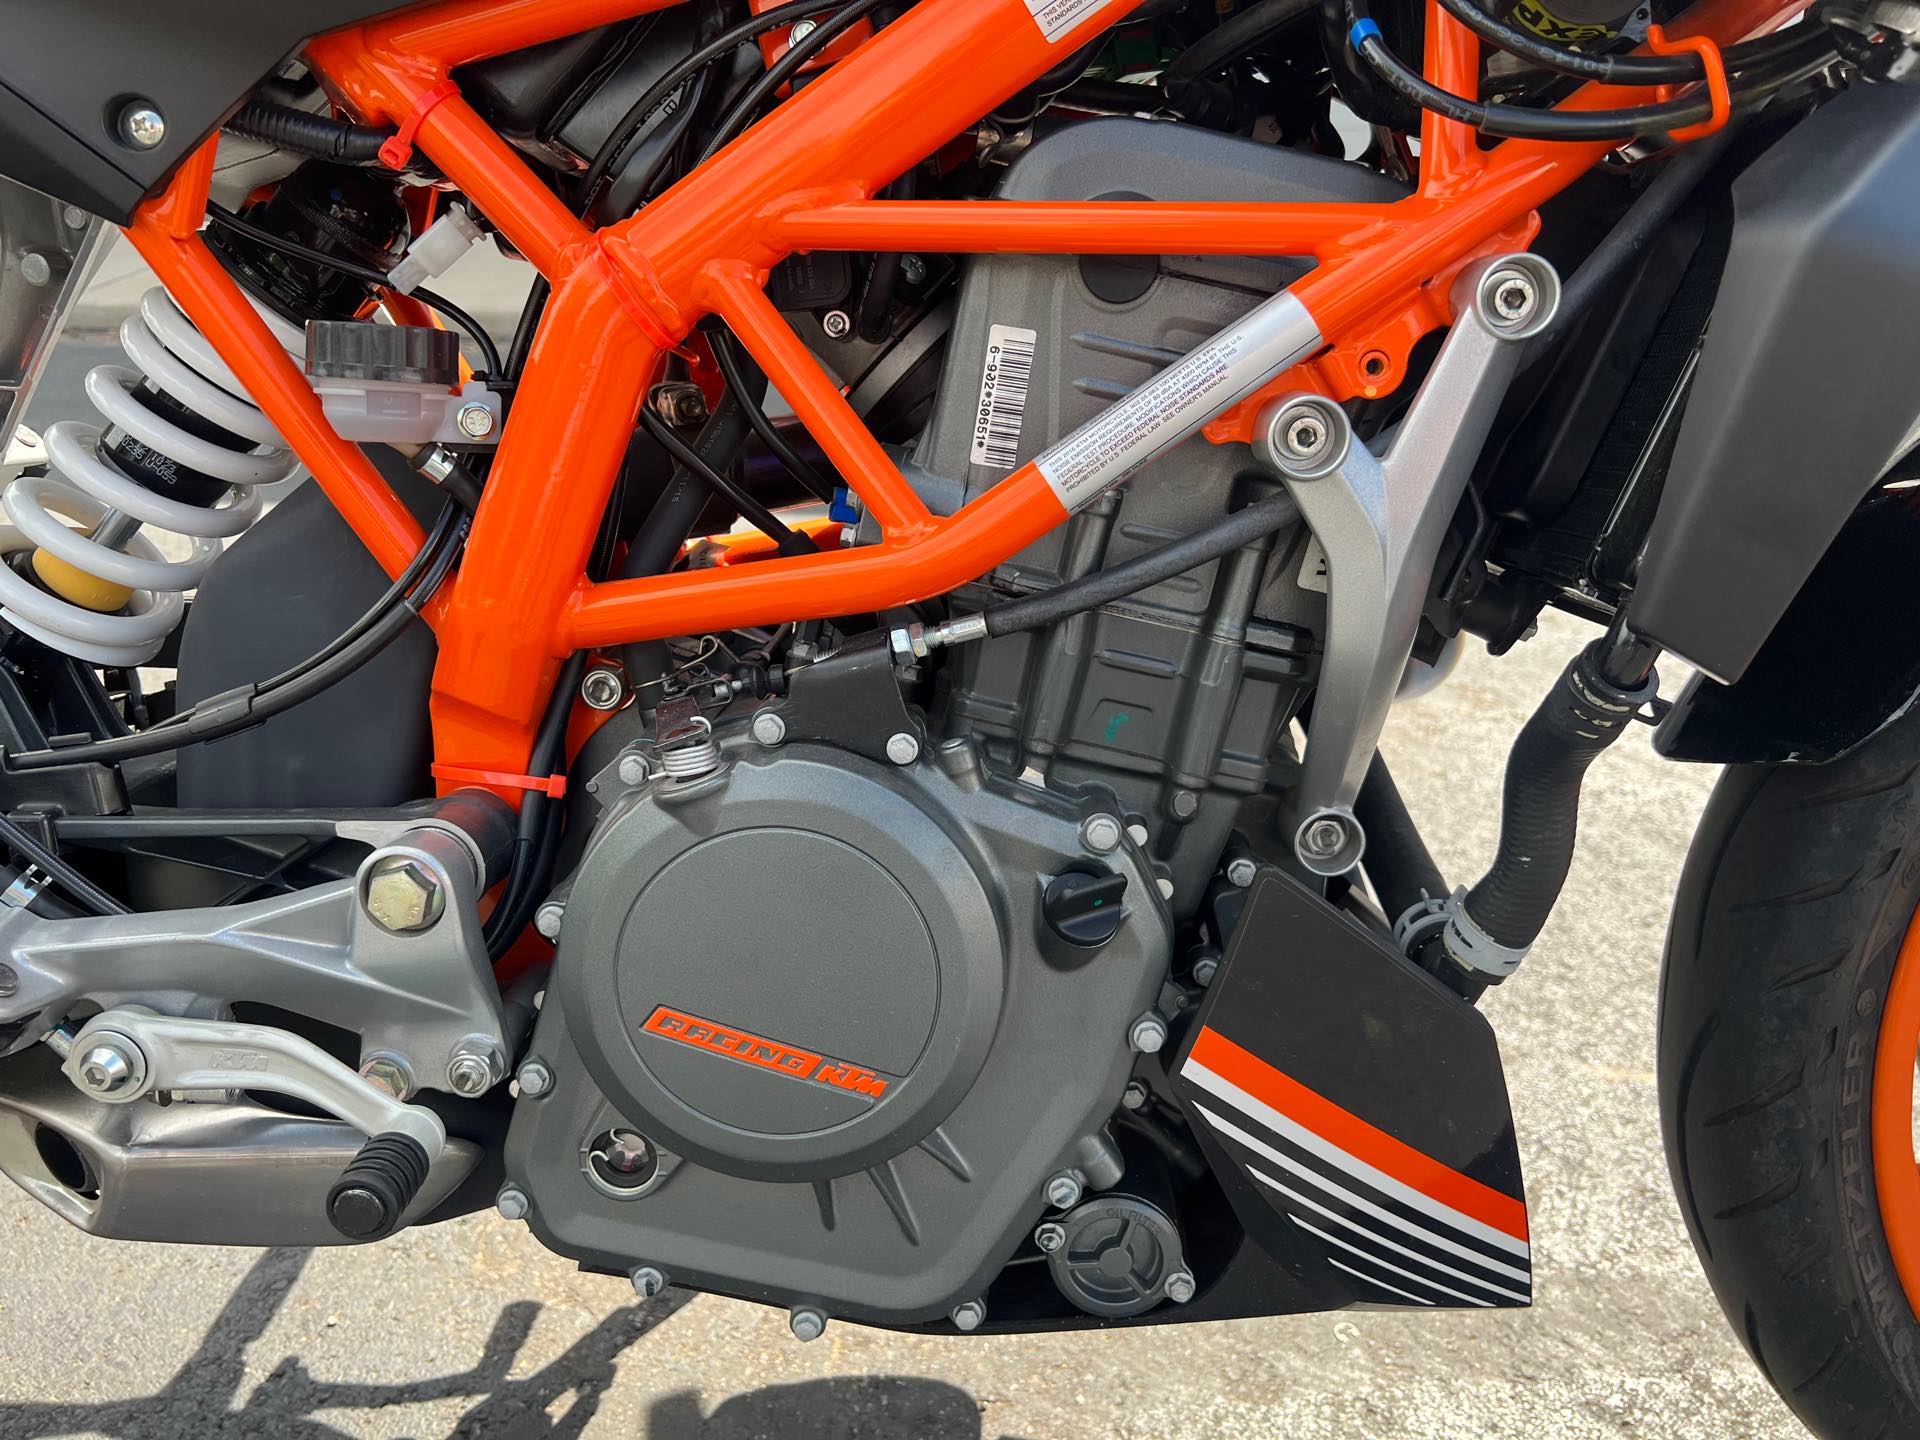 2016 KTM Duke 390 at Aces Motorcycles - Fort Collins